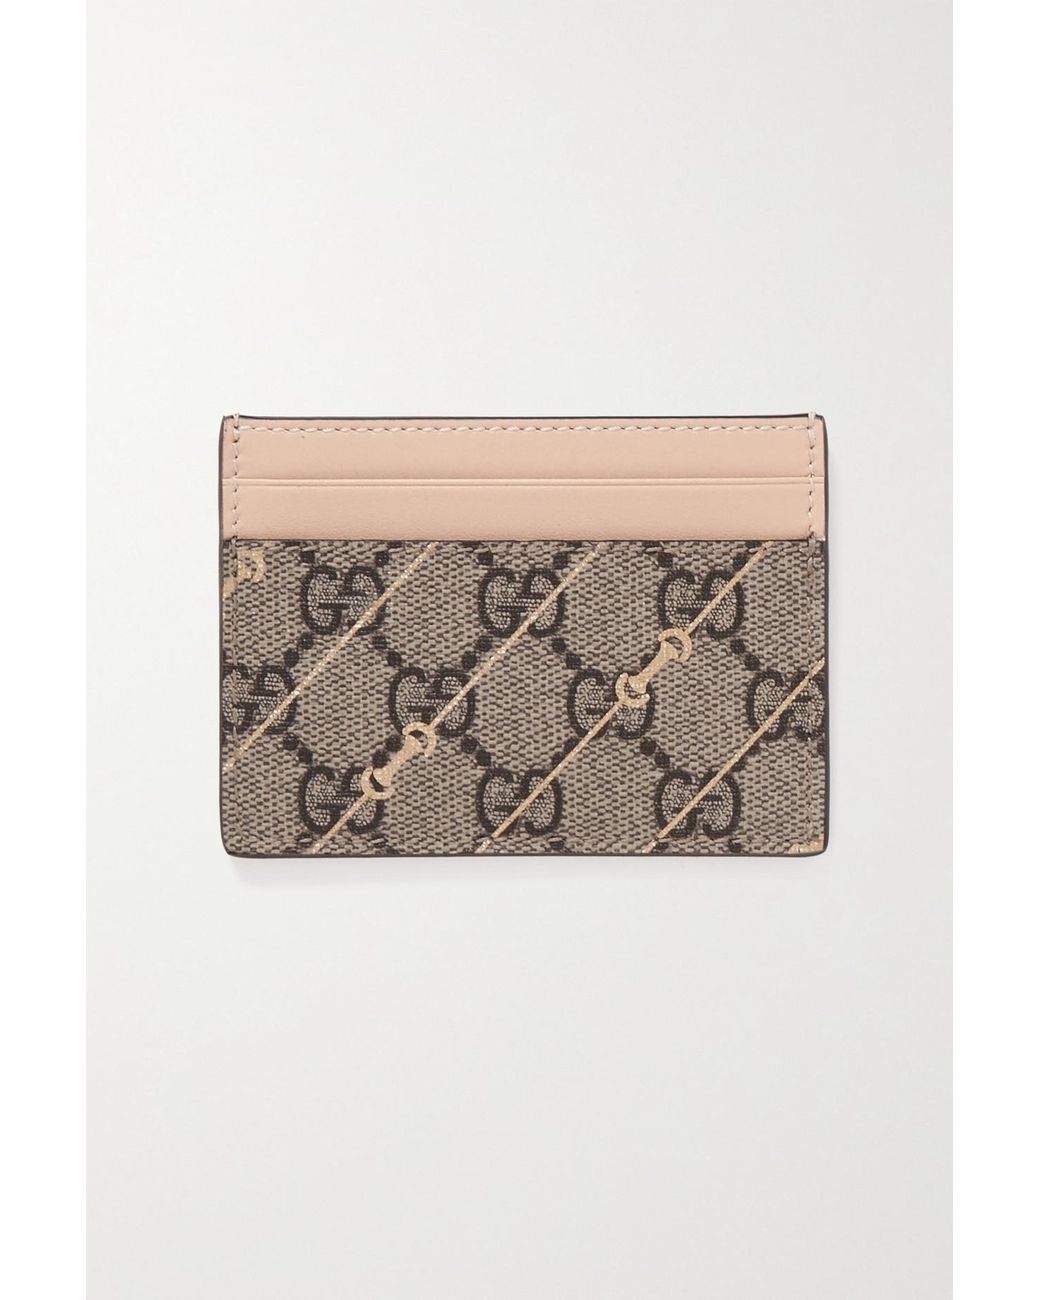 Gucci Horsebit 1955 Leather-trimmed Printed Coated-canvas